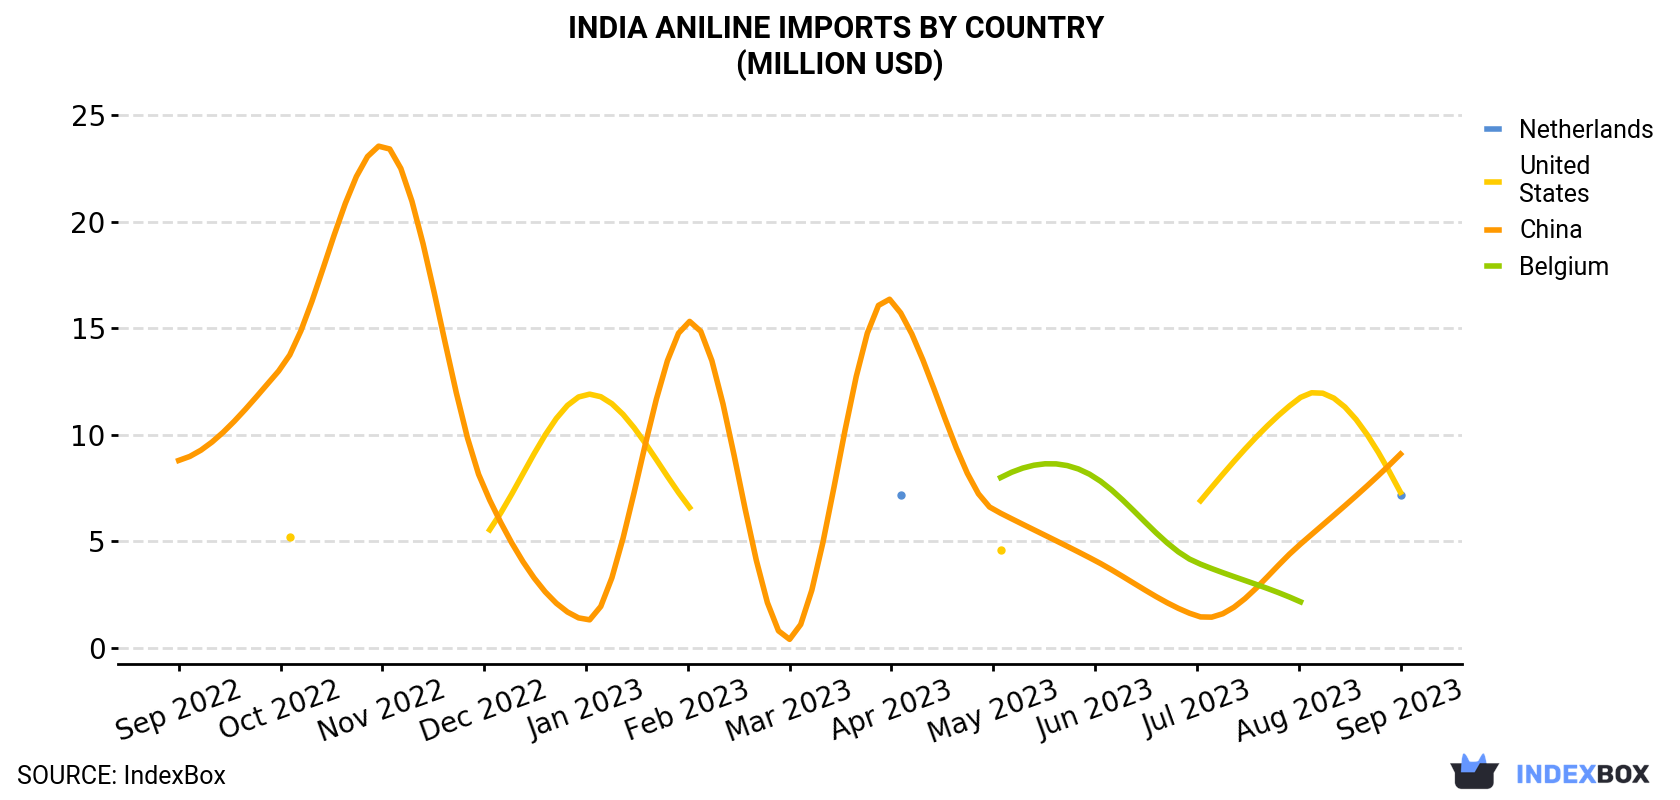 India Aniline Imports By Country (Million USD)